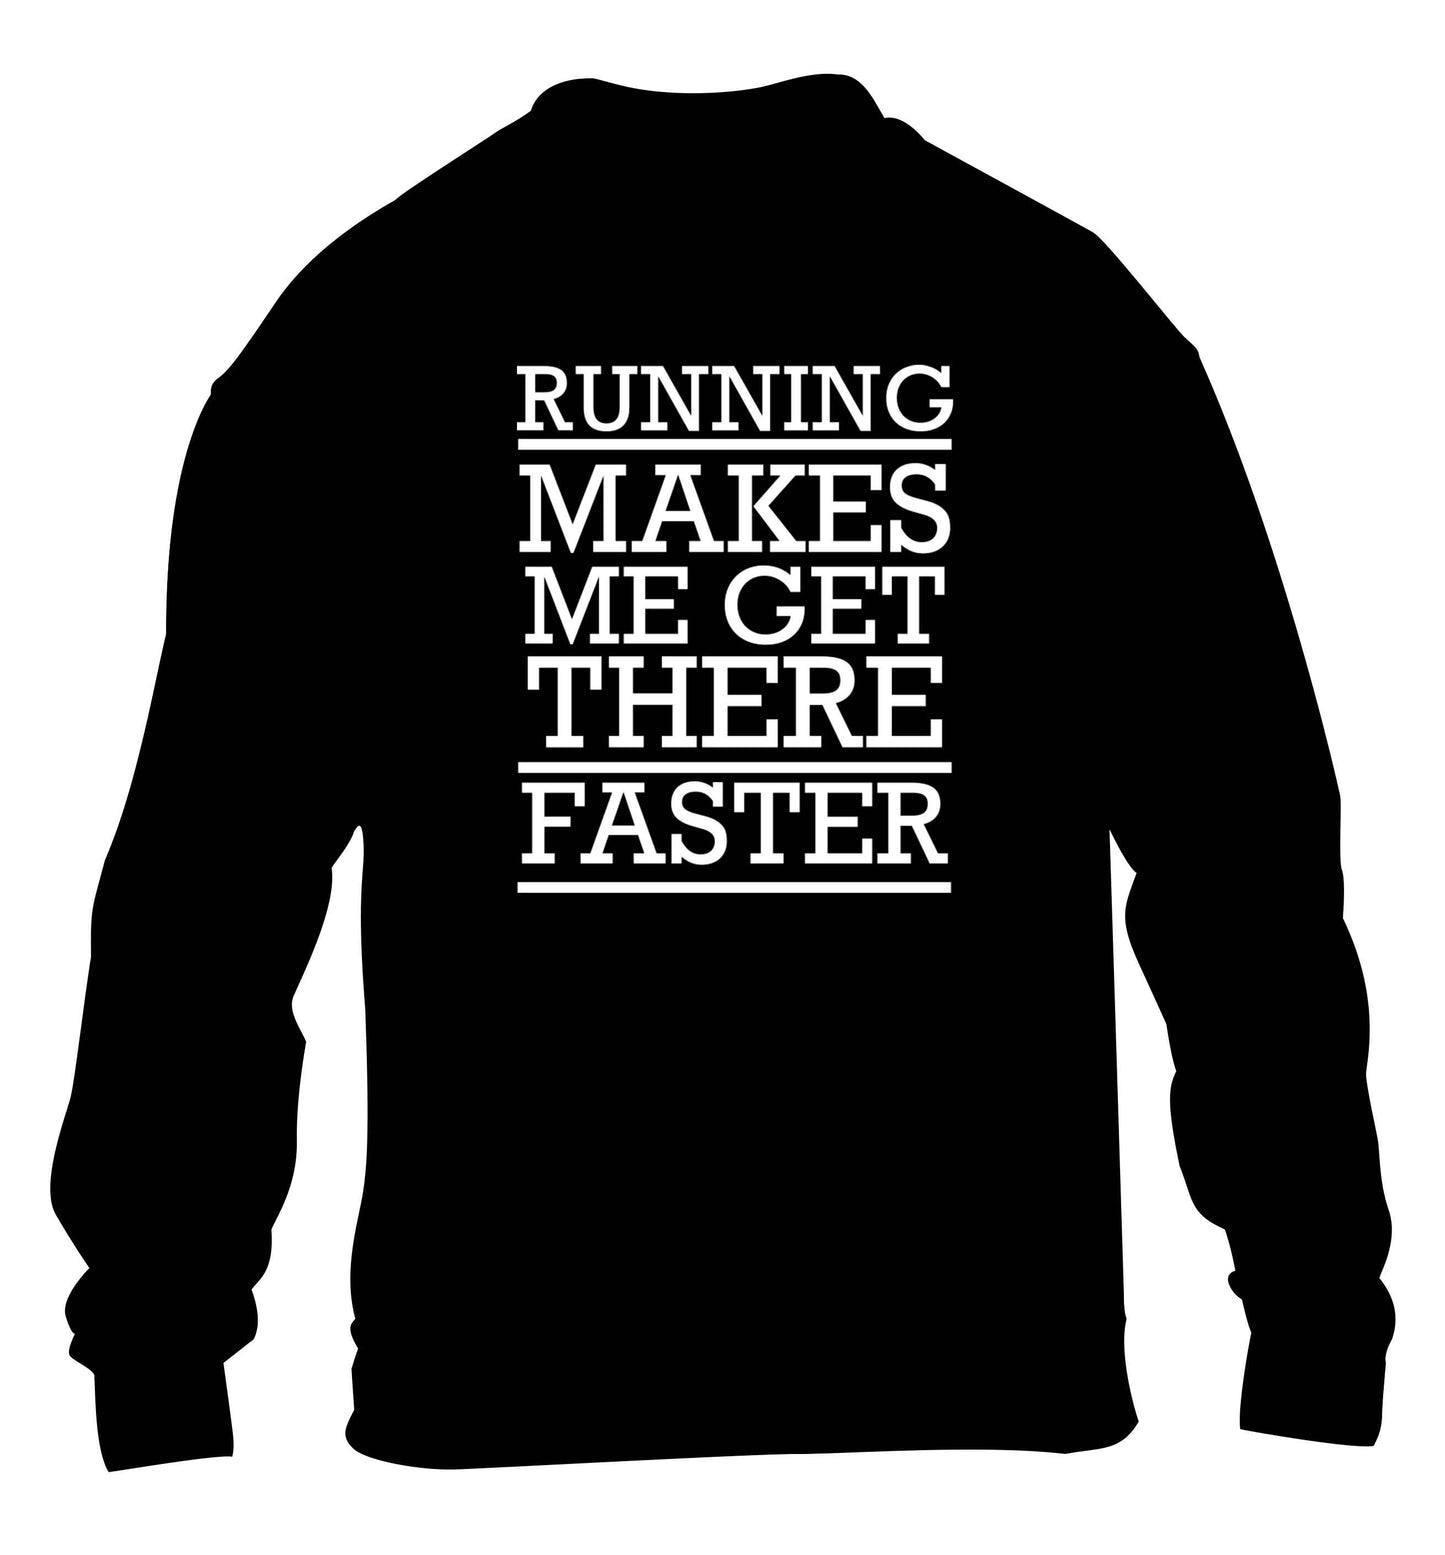 Running makes me get there faster children's black sweater 12-13 Years